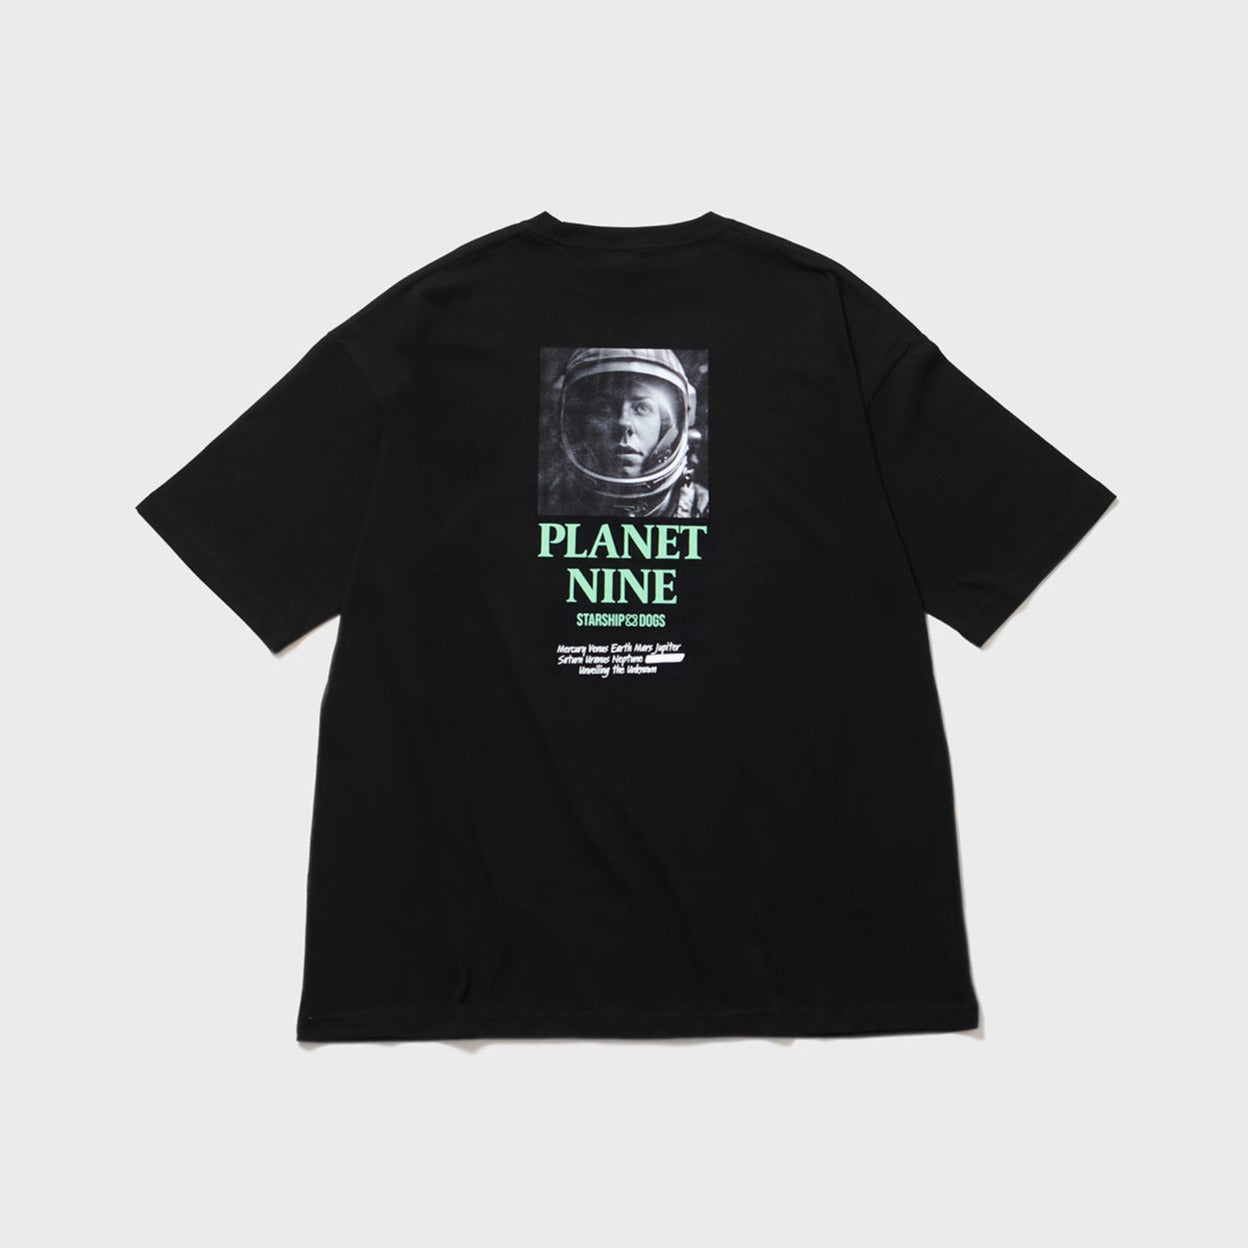 Product Photo: Body color Black. Back print featuring a monochrome photo of a female astronaut and silk-screen printed 'PLANET NINE' (text color light green).